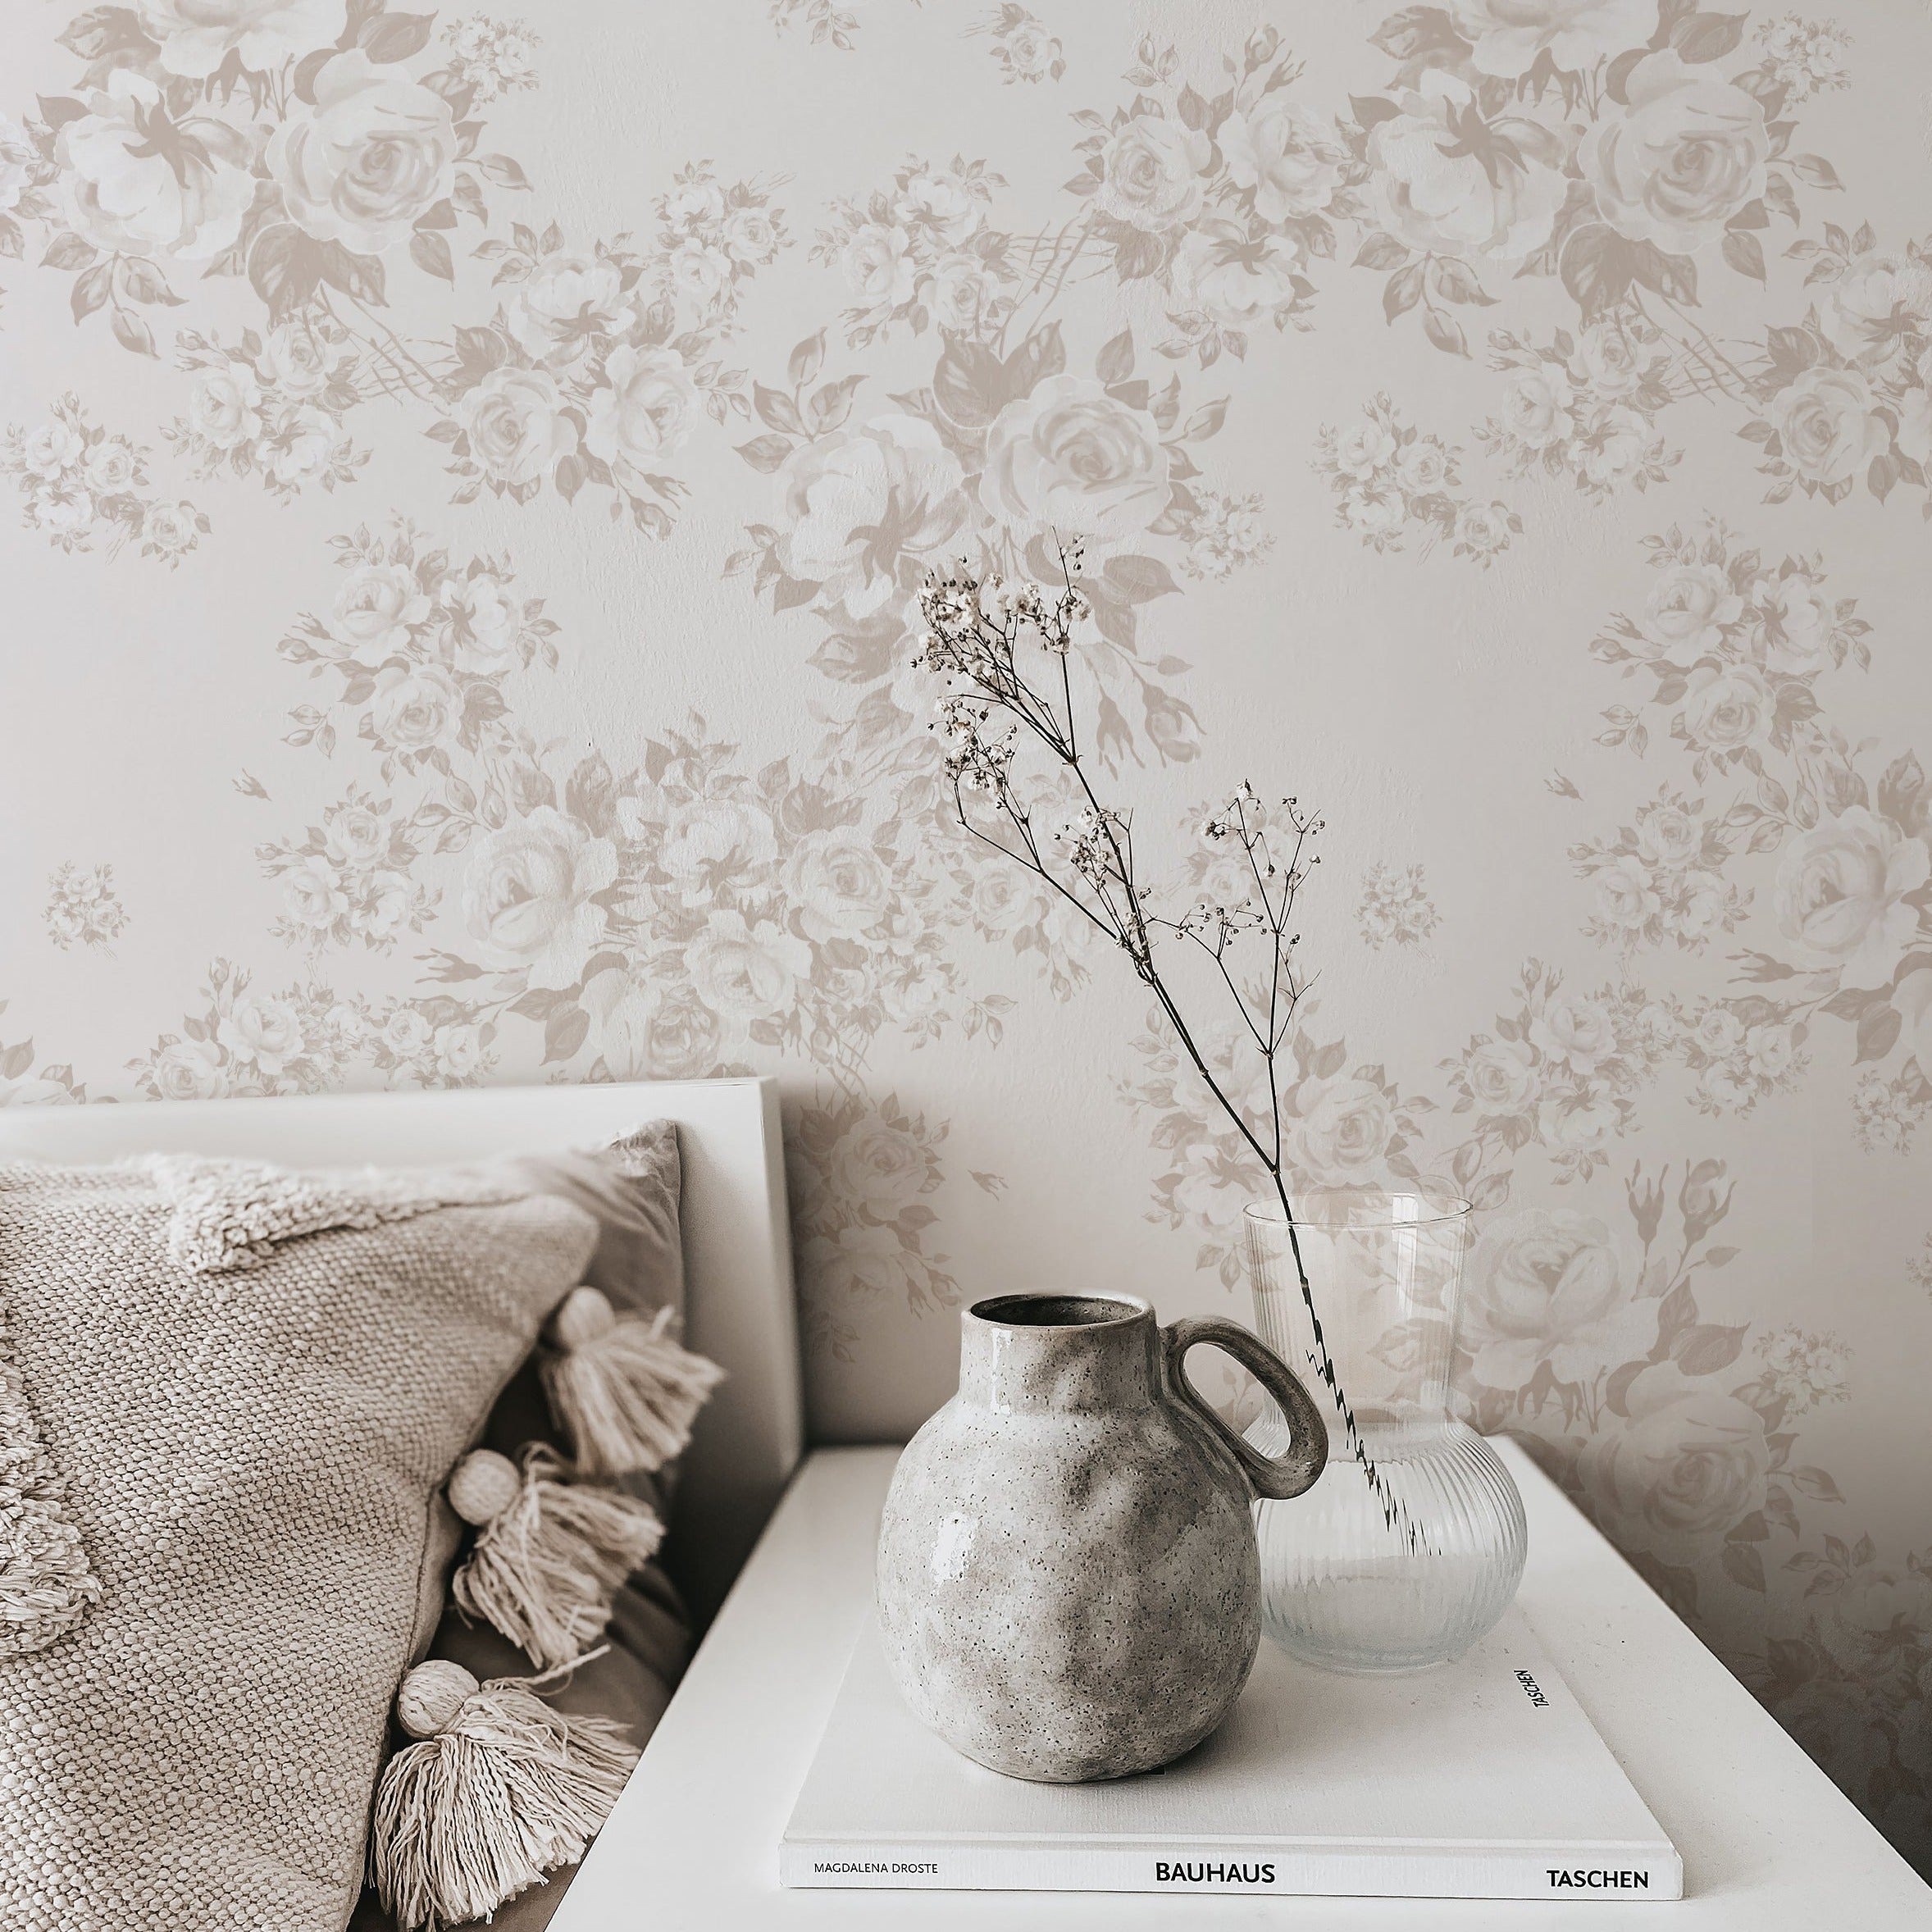 A cozy room corner featuring the 'Rose Bouquet Wallpaper' on the wall, providing a delicate backdrop to a simple home decor scene with a textured cushion, a rustic grey pottery jug, and a clear glass vase with a few sprigs of dried plants, placed on a stack of art books on a white side table.